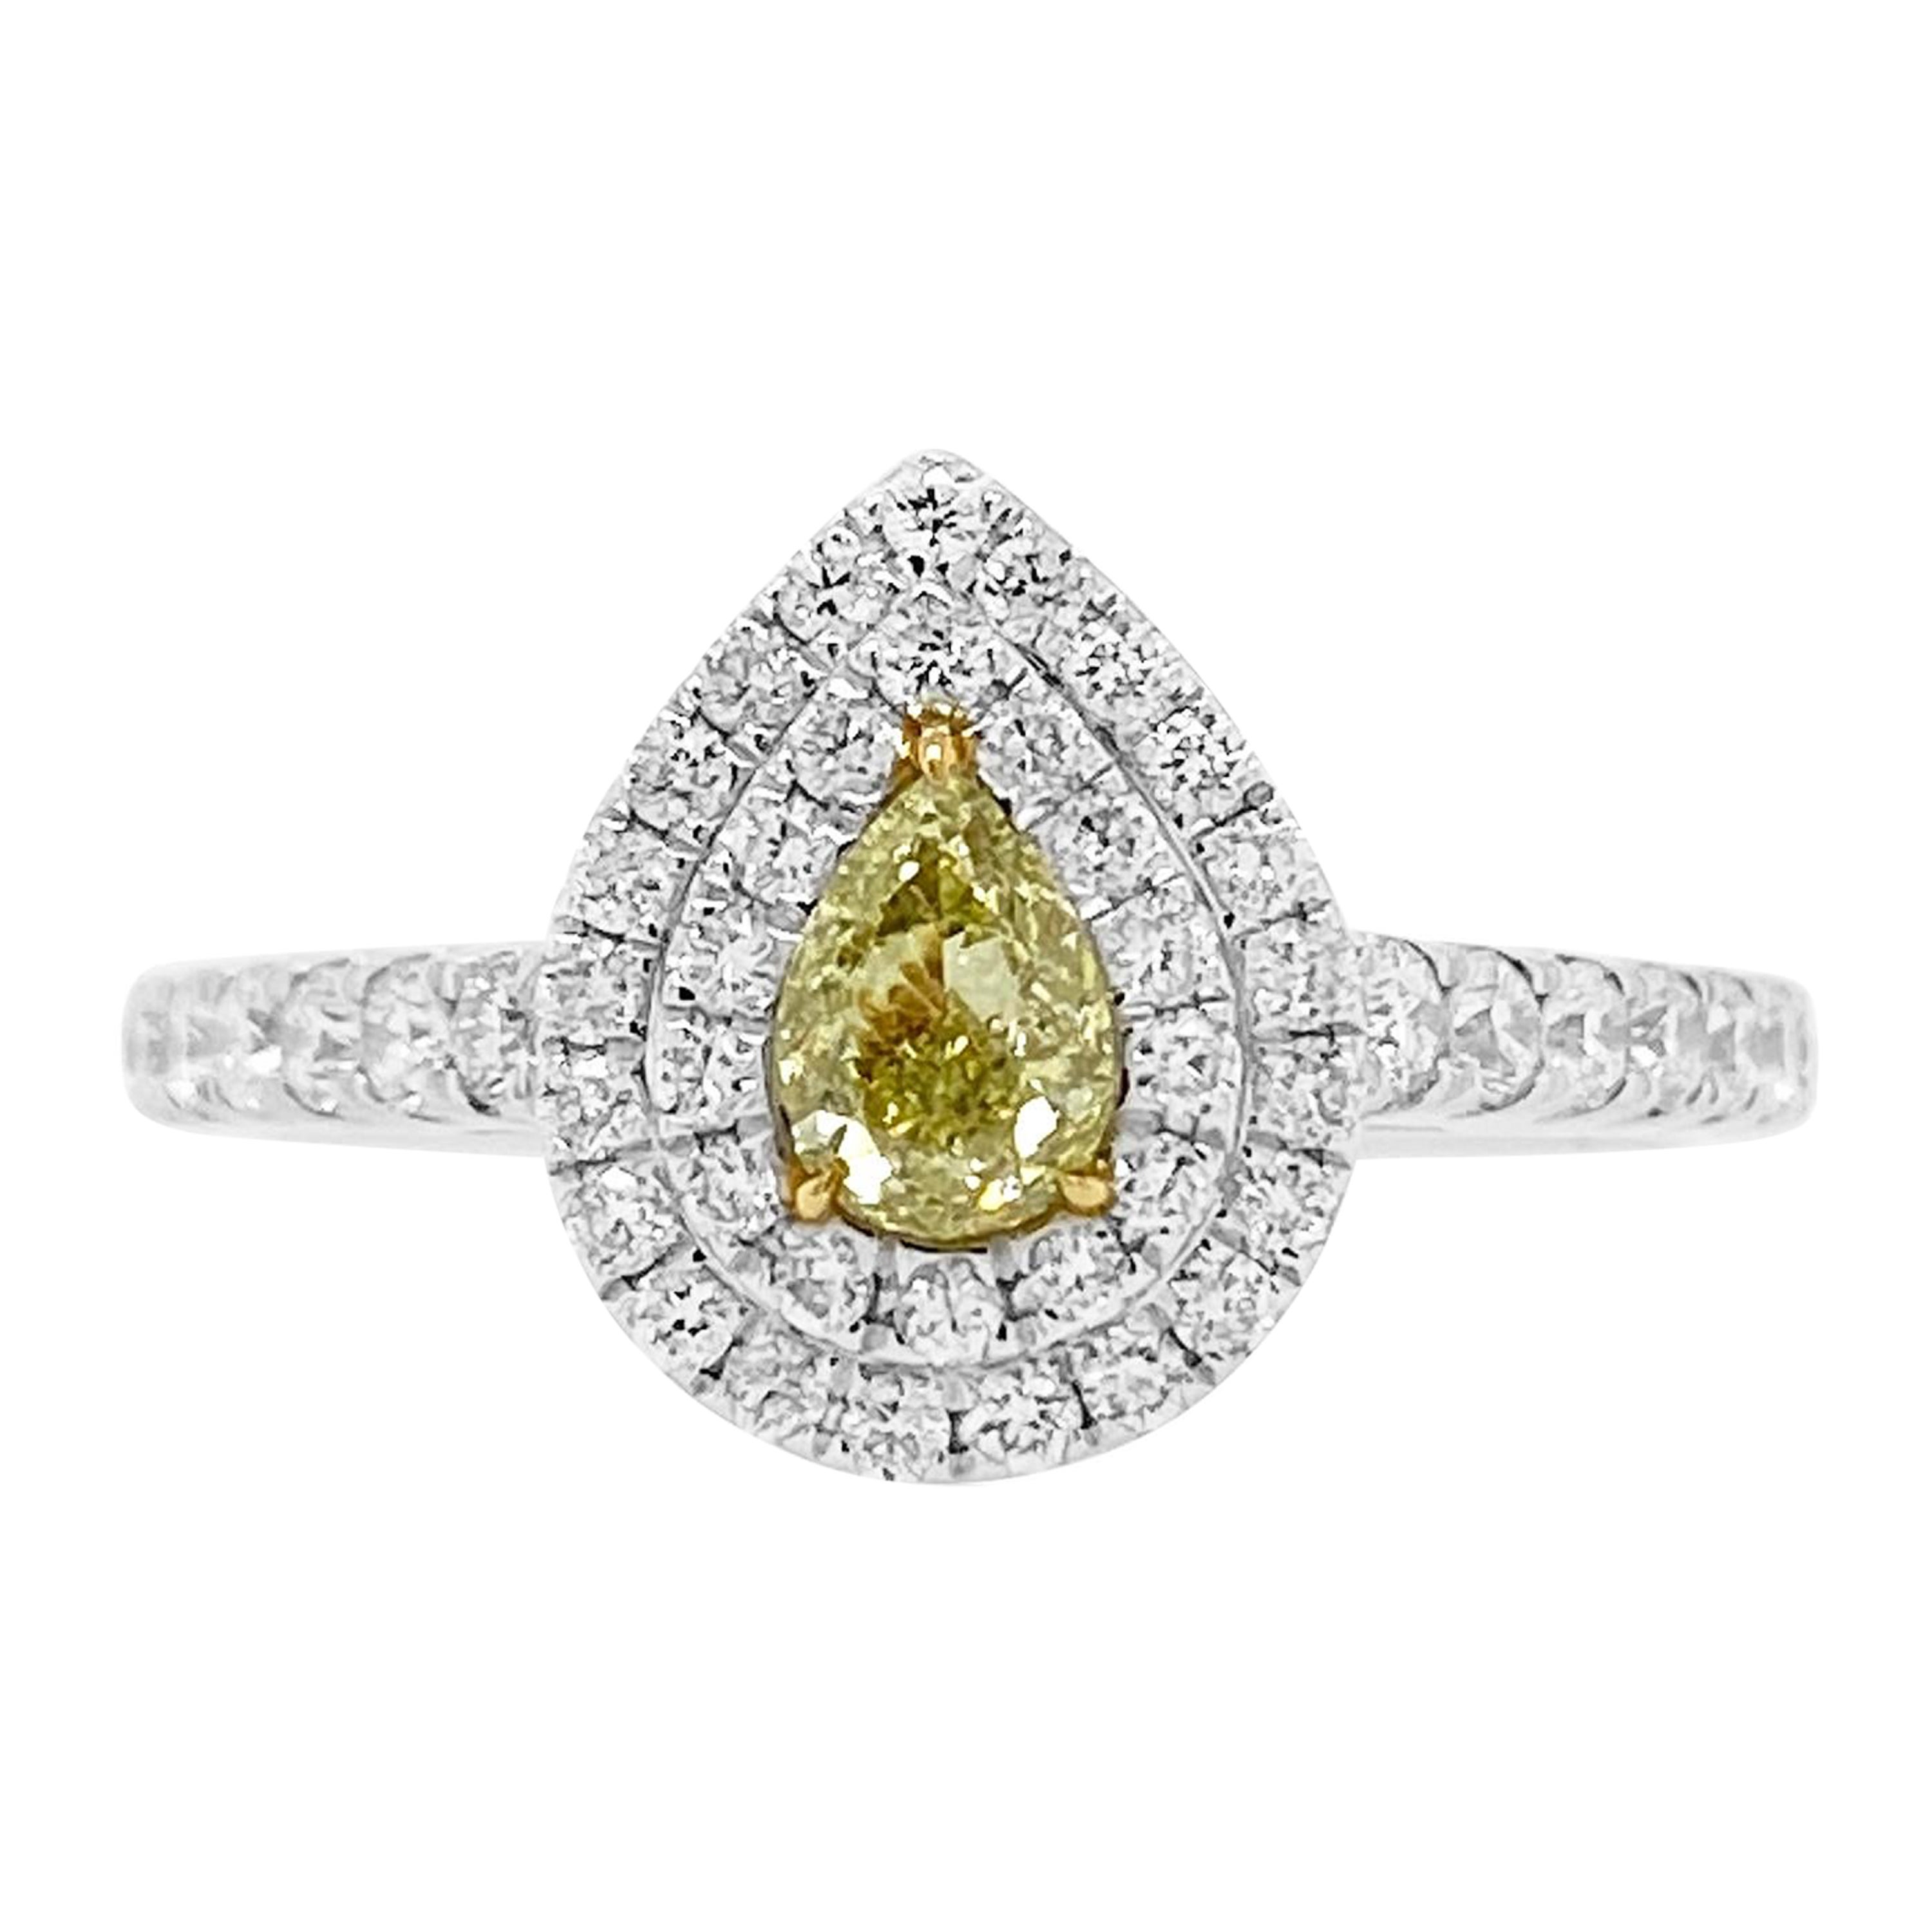 Natural Fancy Yellow Diamond and White diamond Pear shape Engagement Ring